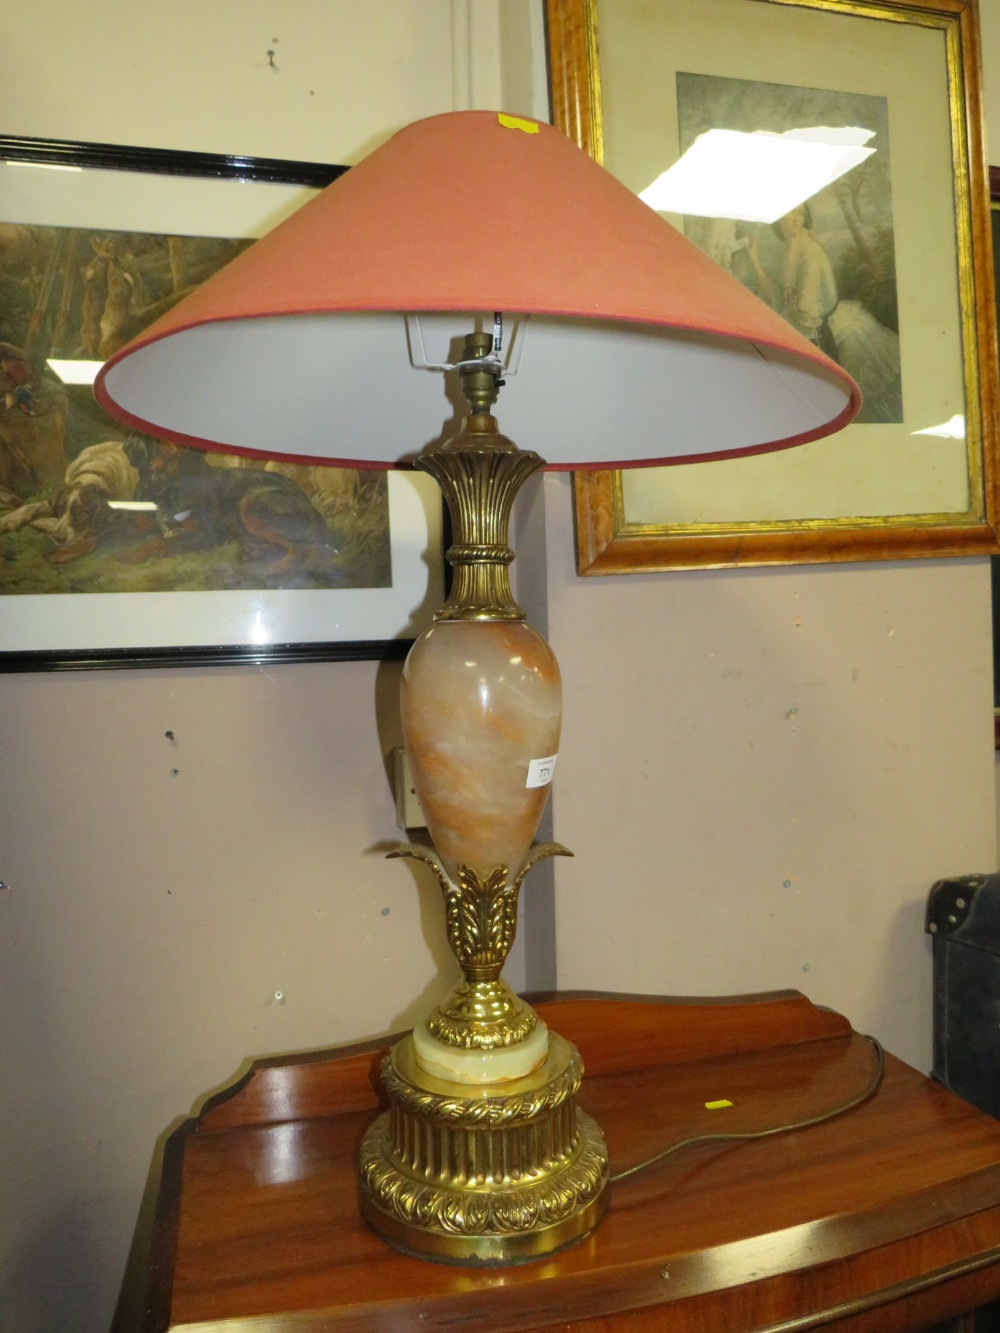 A LARGE MARBLE AND GILT CLASSICAL TABLE LAMP & SHADE - LAMP H 59 CM - Image 4 of 4